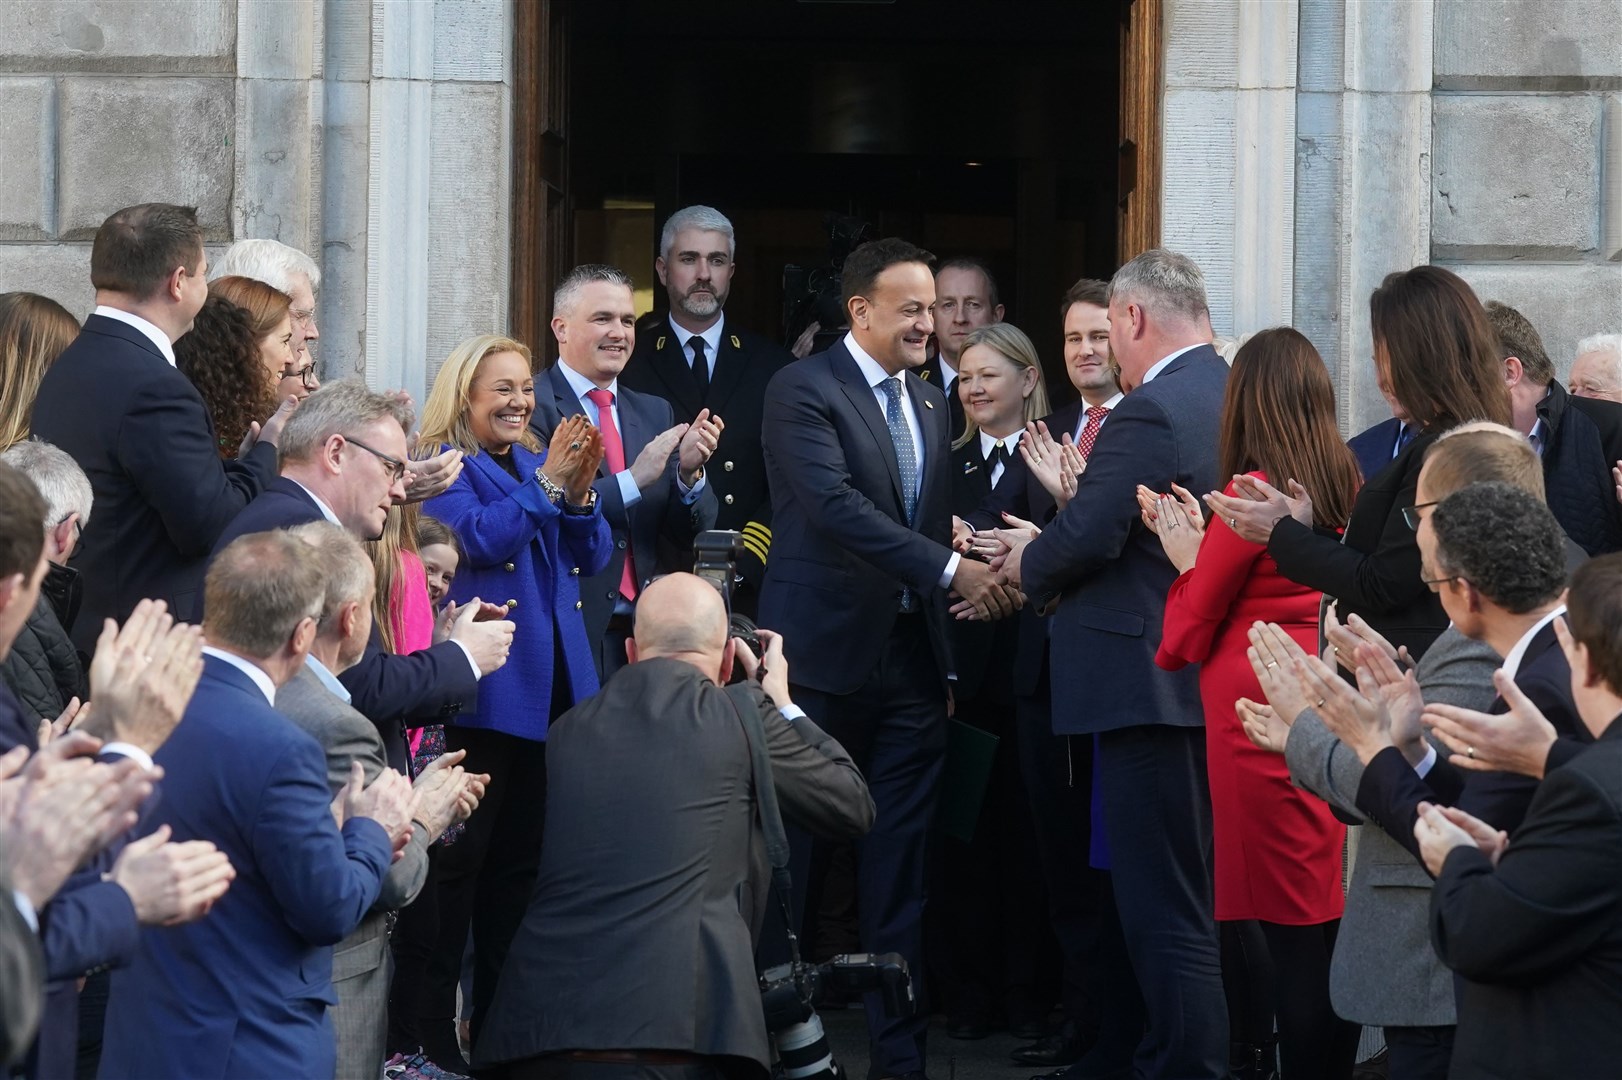 Newly elected Taoiseach Leo Varadkar leaves Leinster House in Dublin to see the president (Brian Lawless/PA)